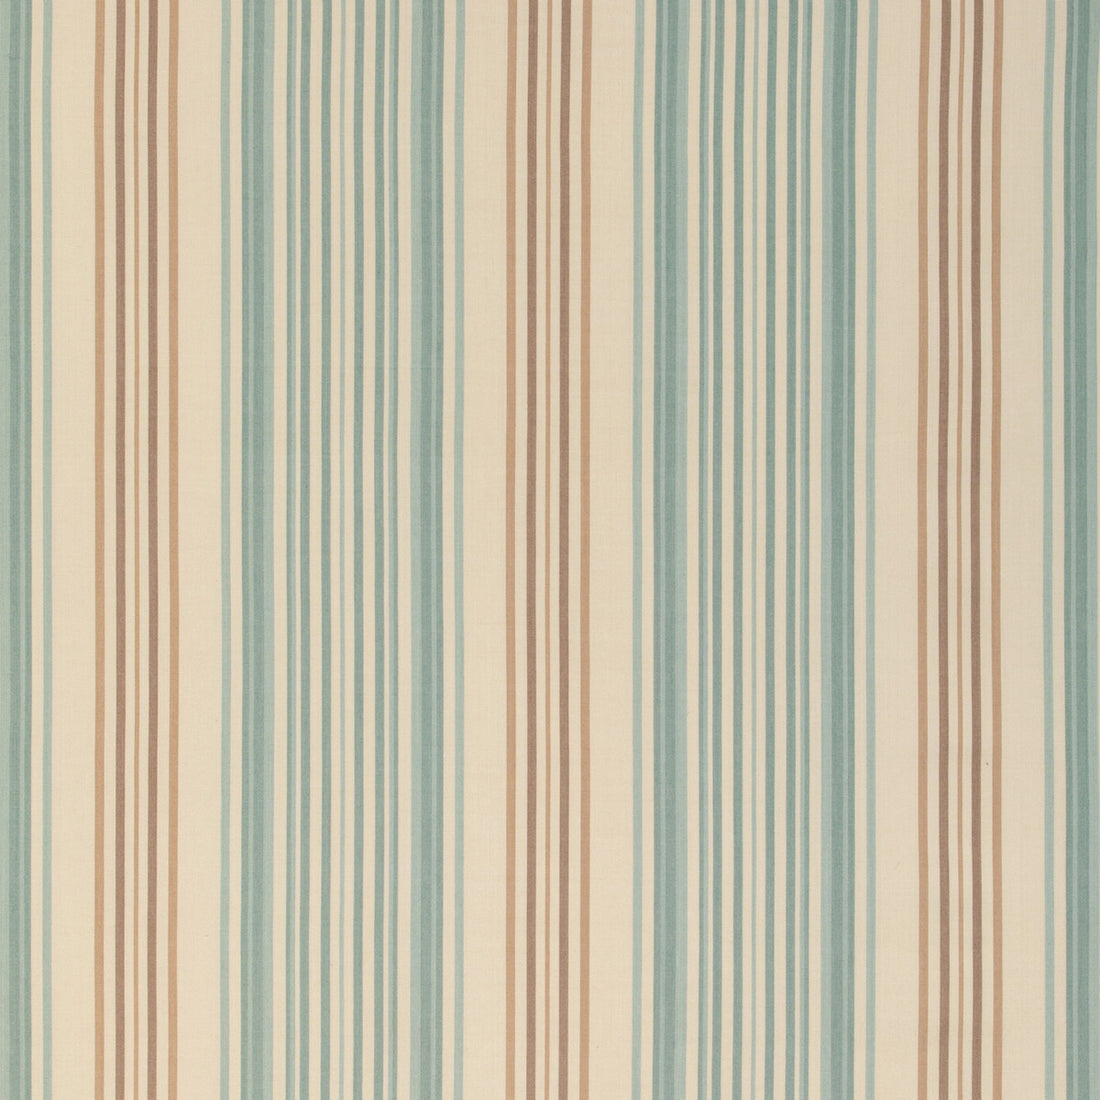 Upland Stripe fabric in lake color - pattern 2023104.1613.0 - by Lee Jofa in the Highfield Stripes And Plaids collection